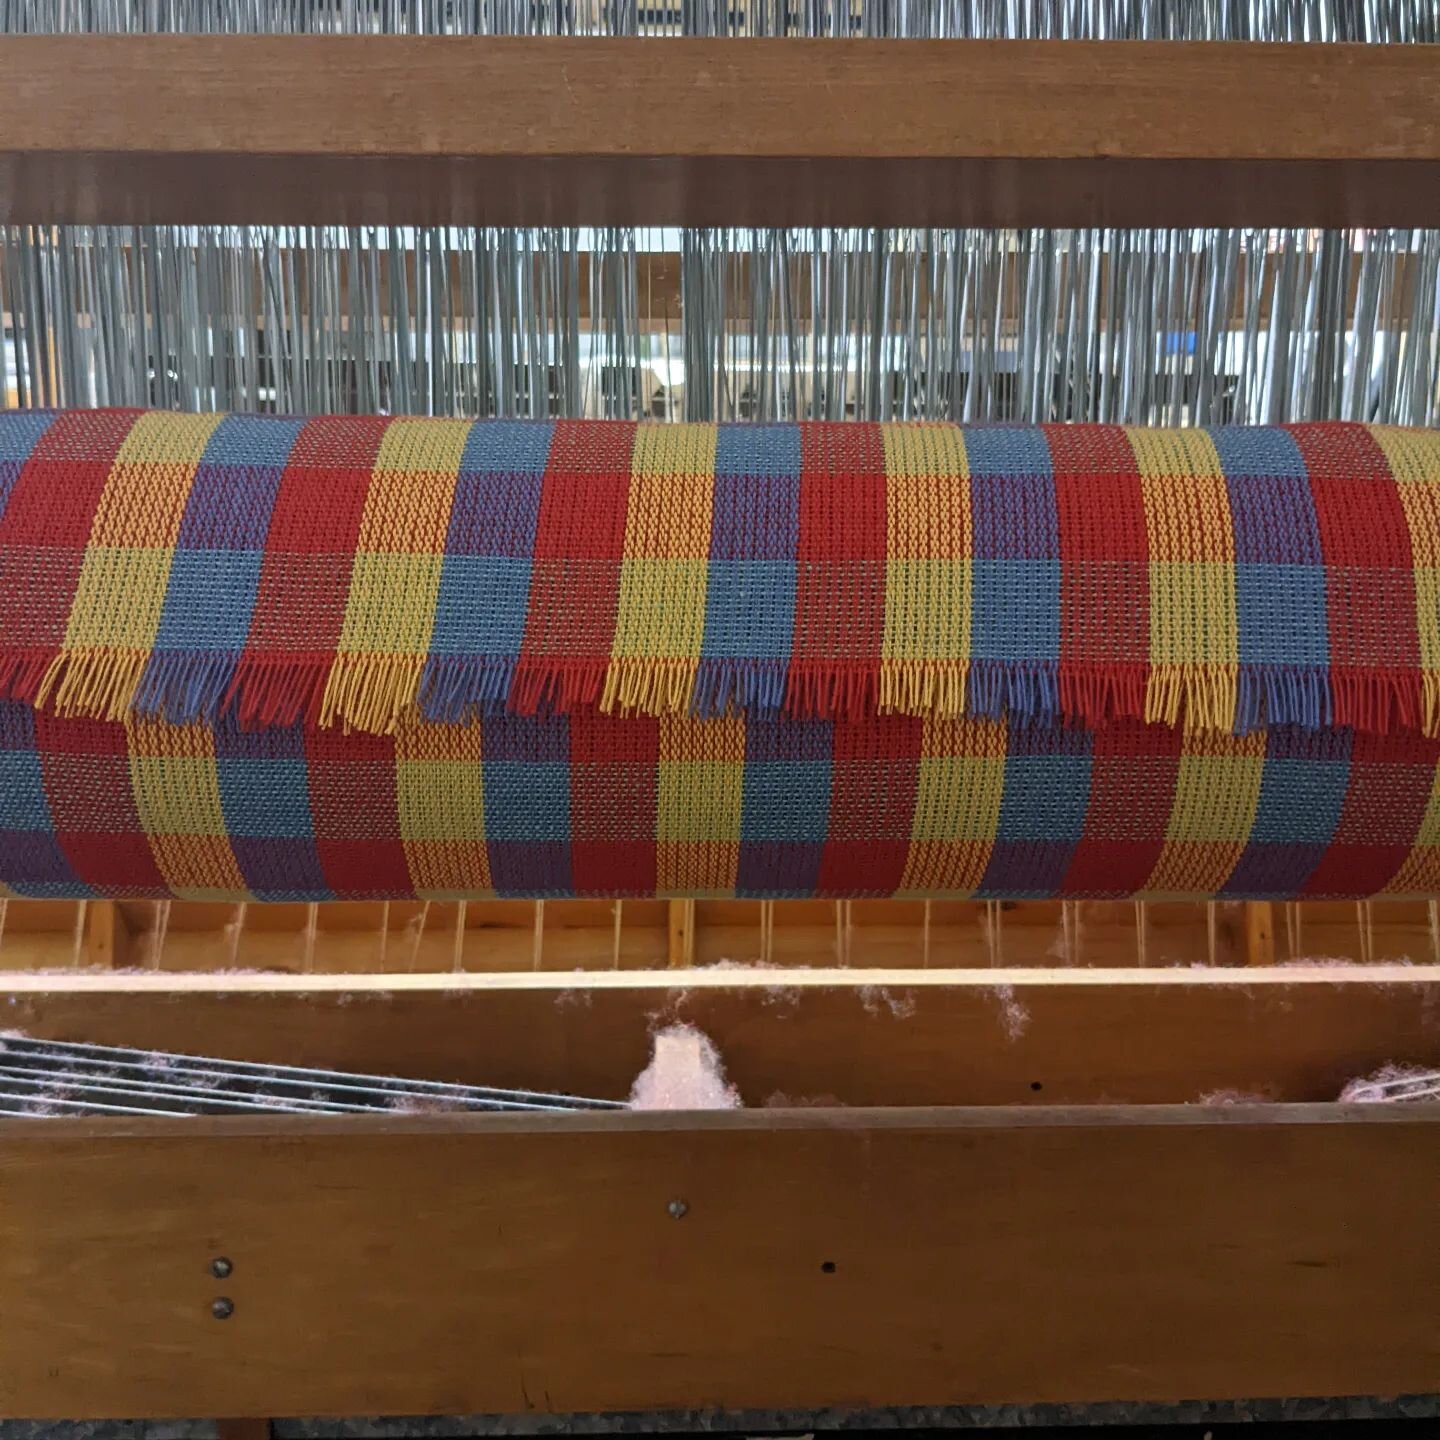 Off the loom and into the wash ❤️🎈
#handwoven #weaving